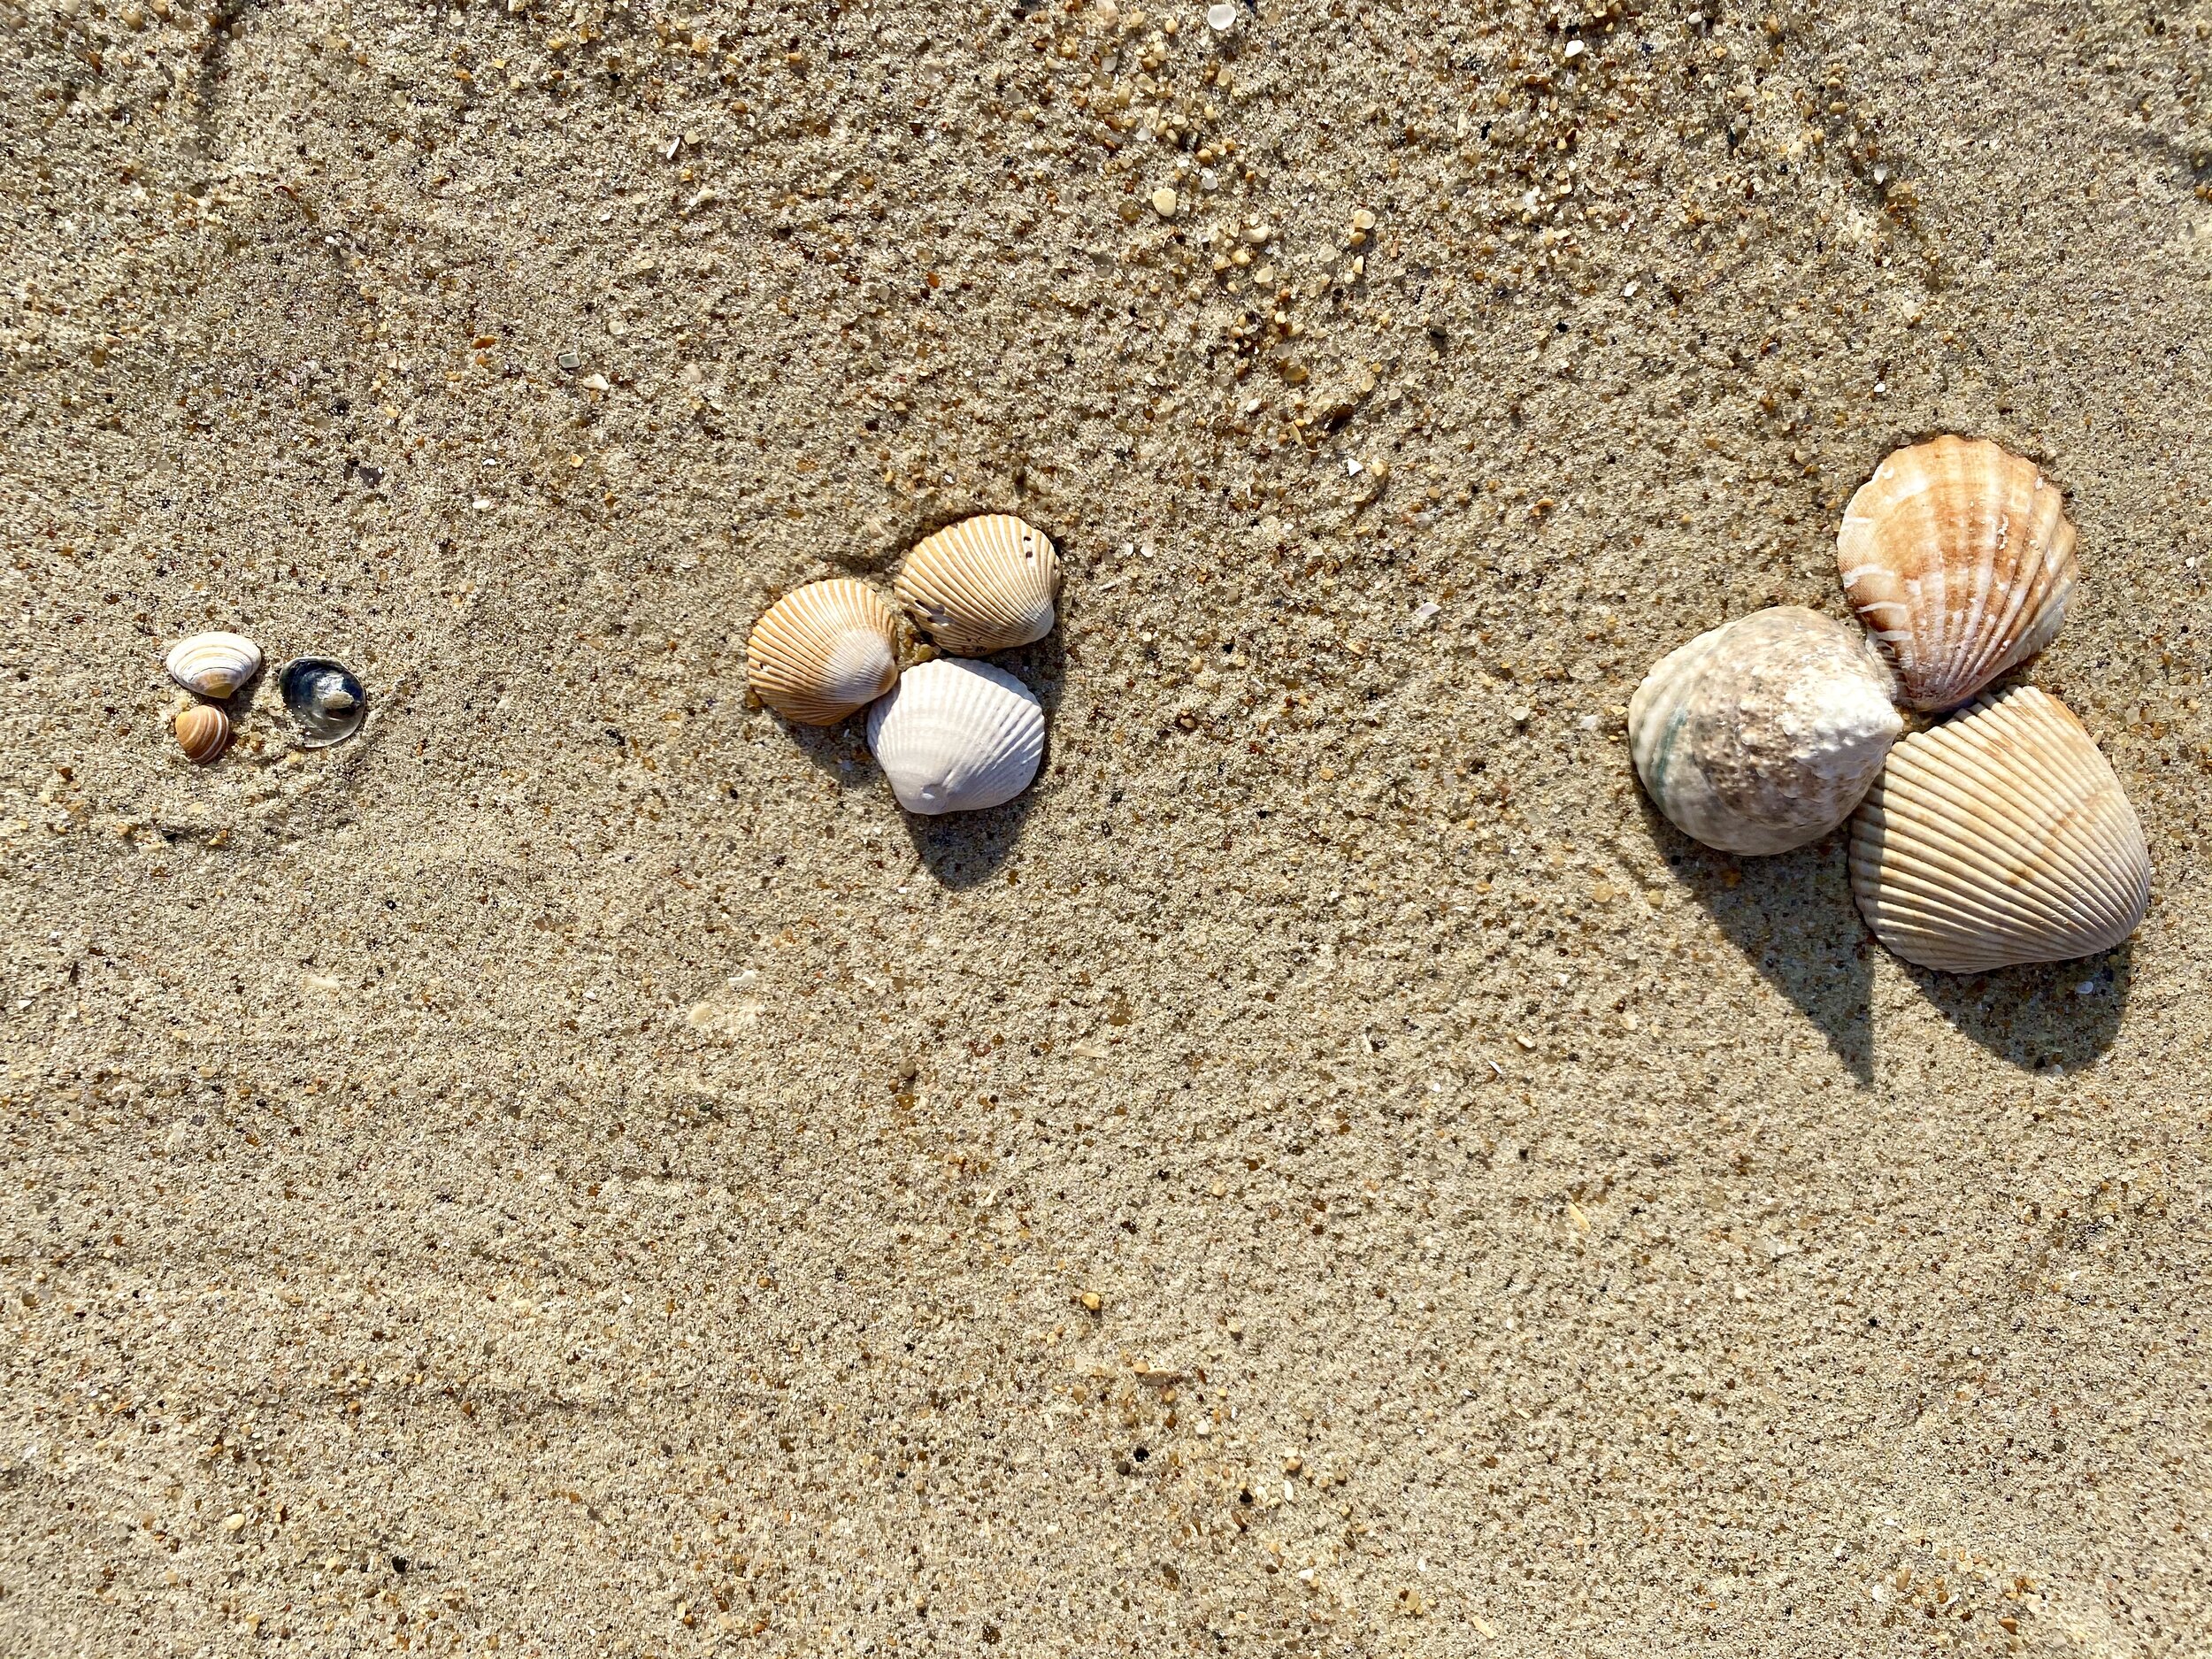 A Beginner's Guide to Collecting Seashells as a Hobby - HobbyLark